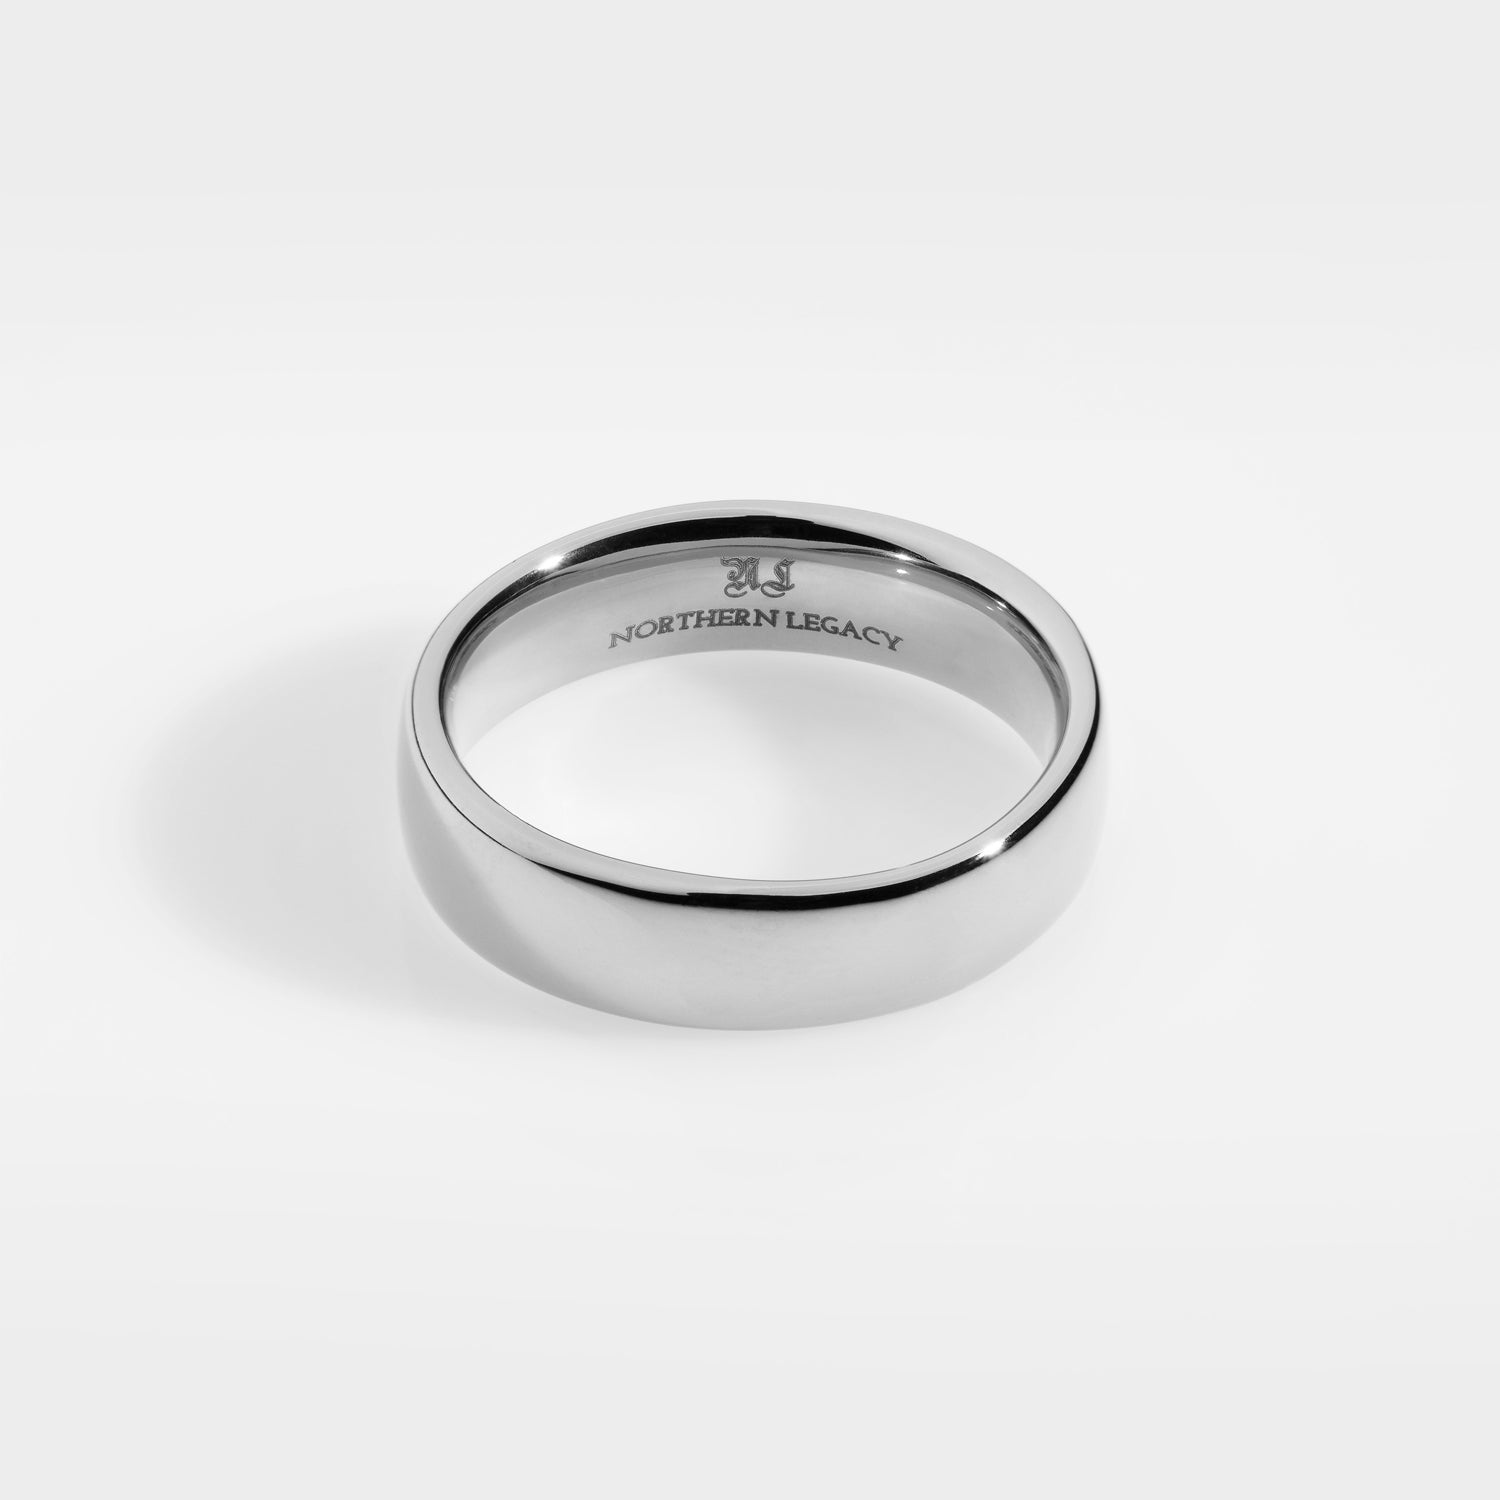 Siempre band - Silver-toned ring